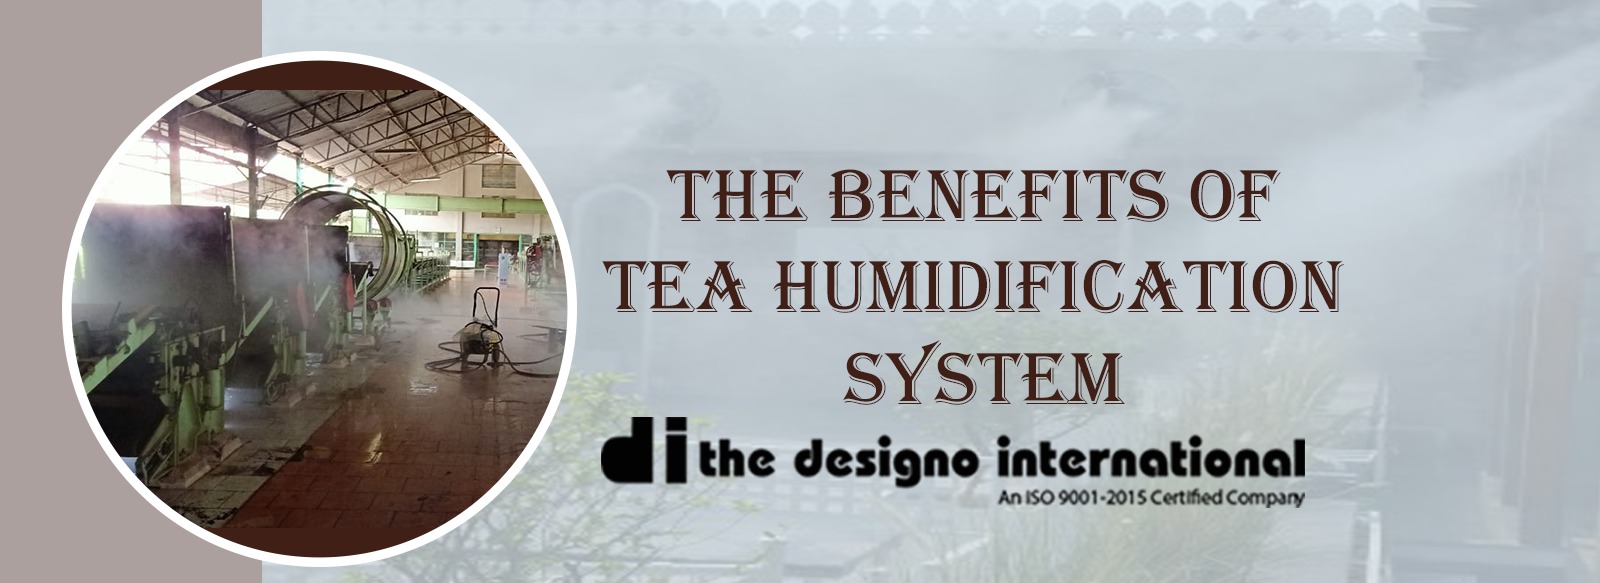 The Benefits of Tea Humidification System: Enhancing the Tea Quality Industry with The Designo International’s Innovation TO Enhance The Quality of Tea.